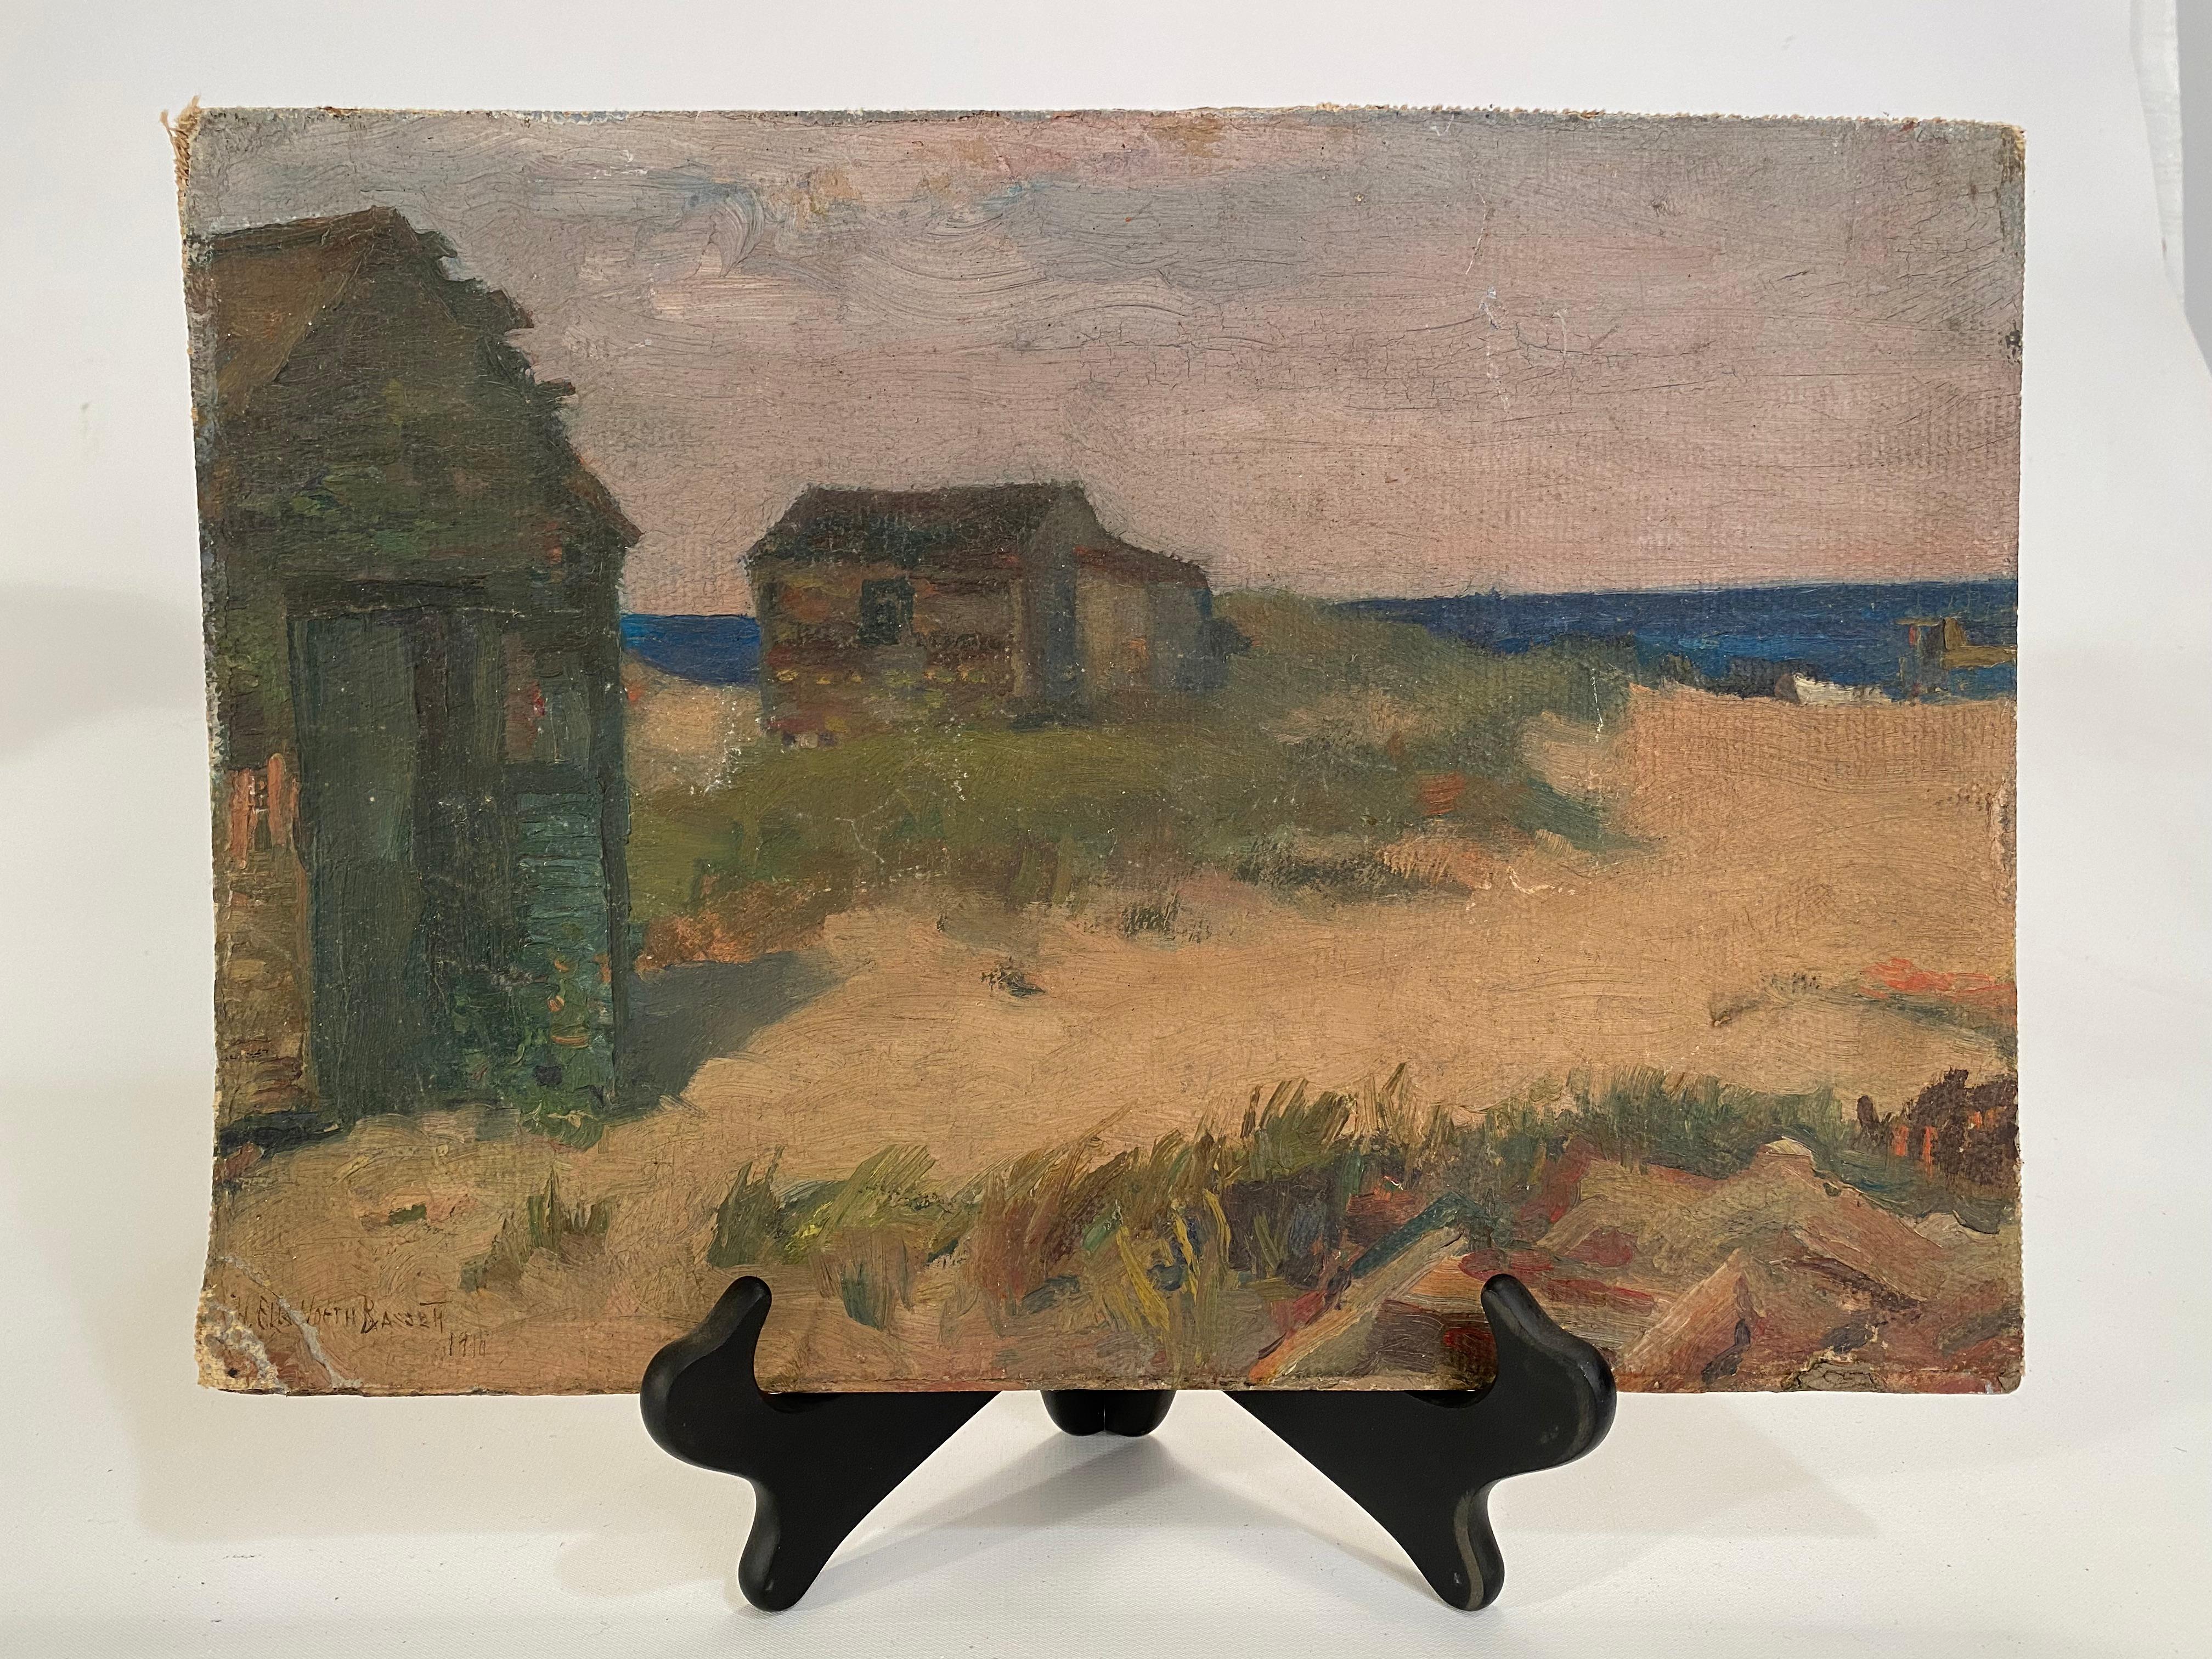 Signed beach scene. Oil on canvas laid on board by Harold Ellsworth Bassett (1875-1943). Signed and dated lower left, H. Ellsworth Bassett, 1910. The artist has depicted a quiet beach scene with cottages or sea shacks with the ocean off in the